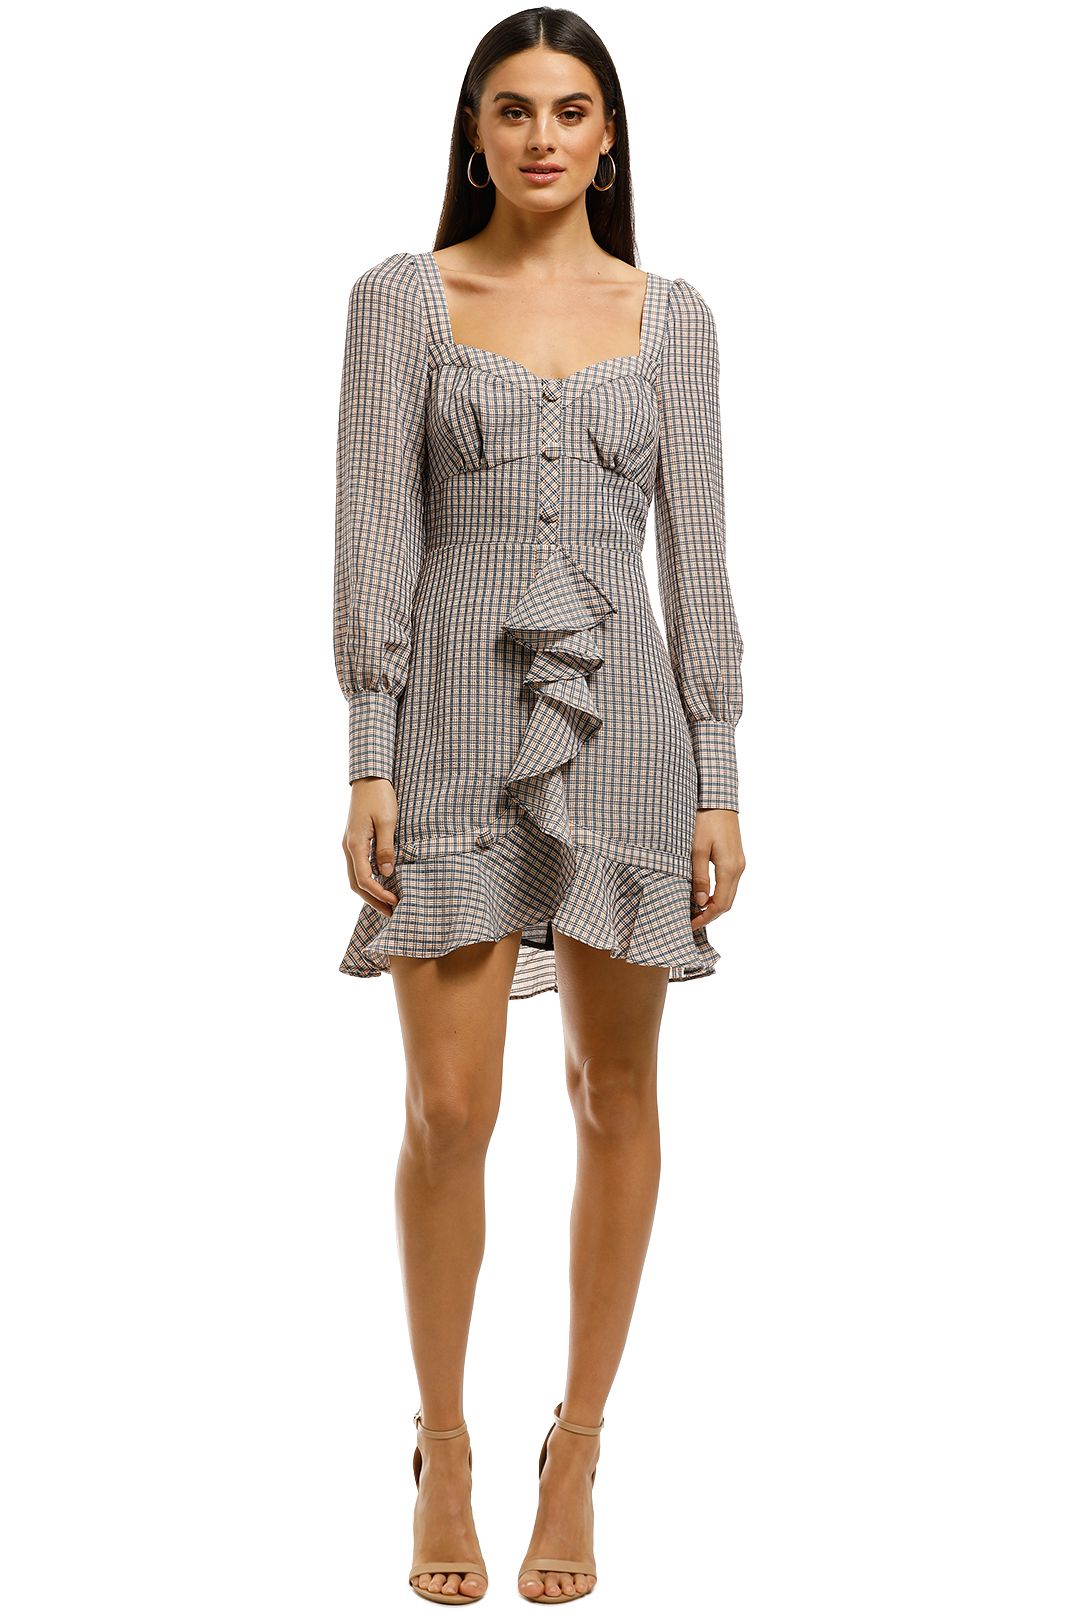 The-East-Order-Freya-Mini-Dress-Plaid-Clubhouse-Front